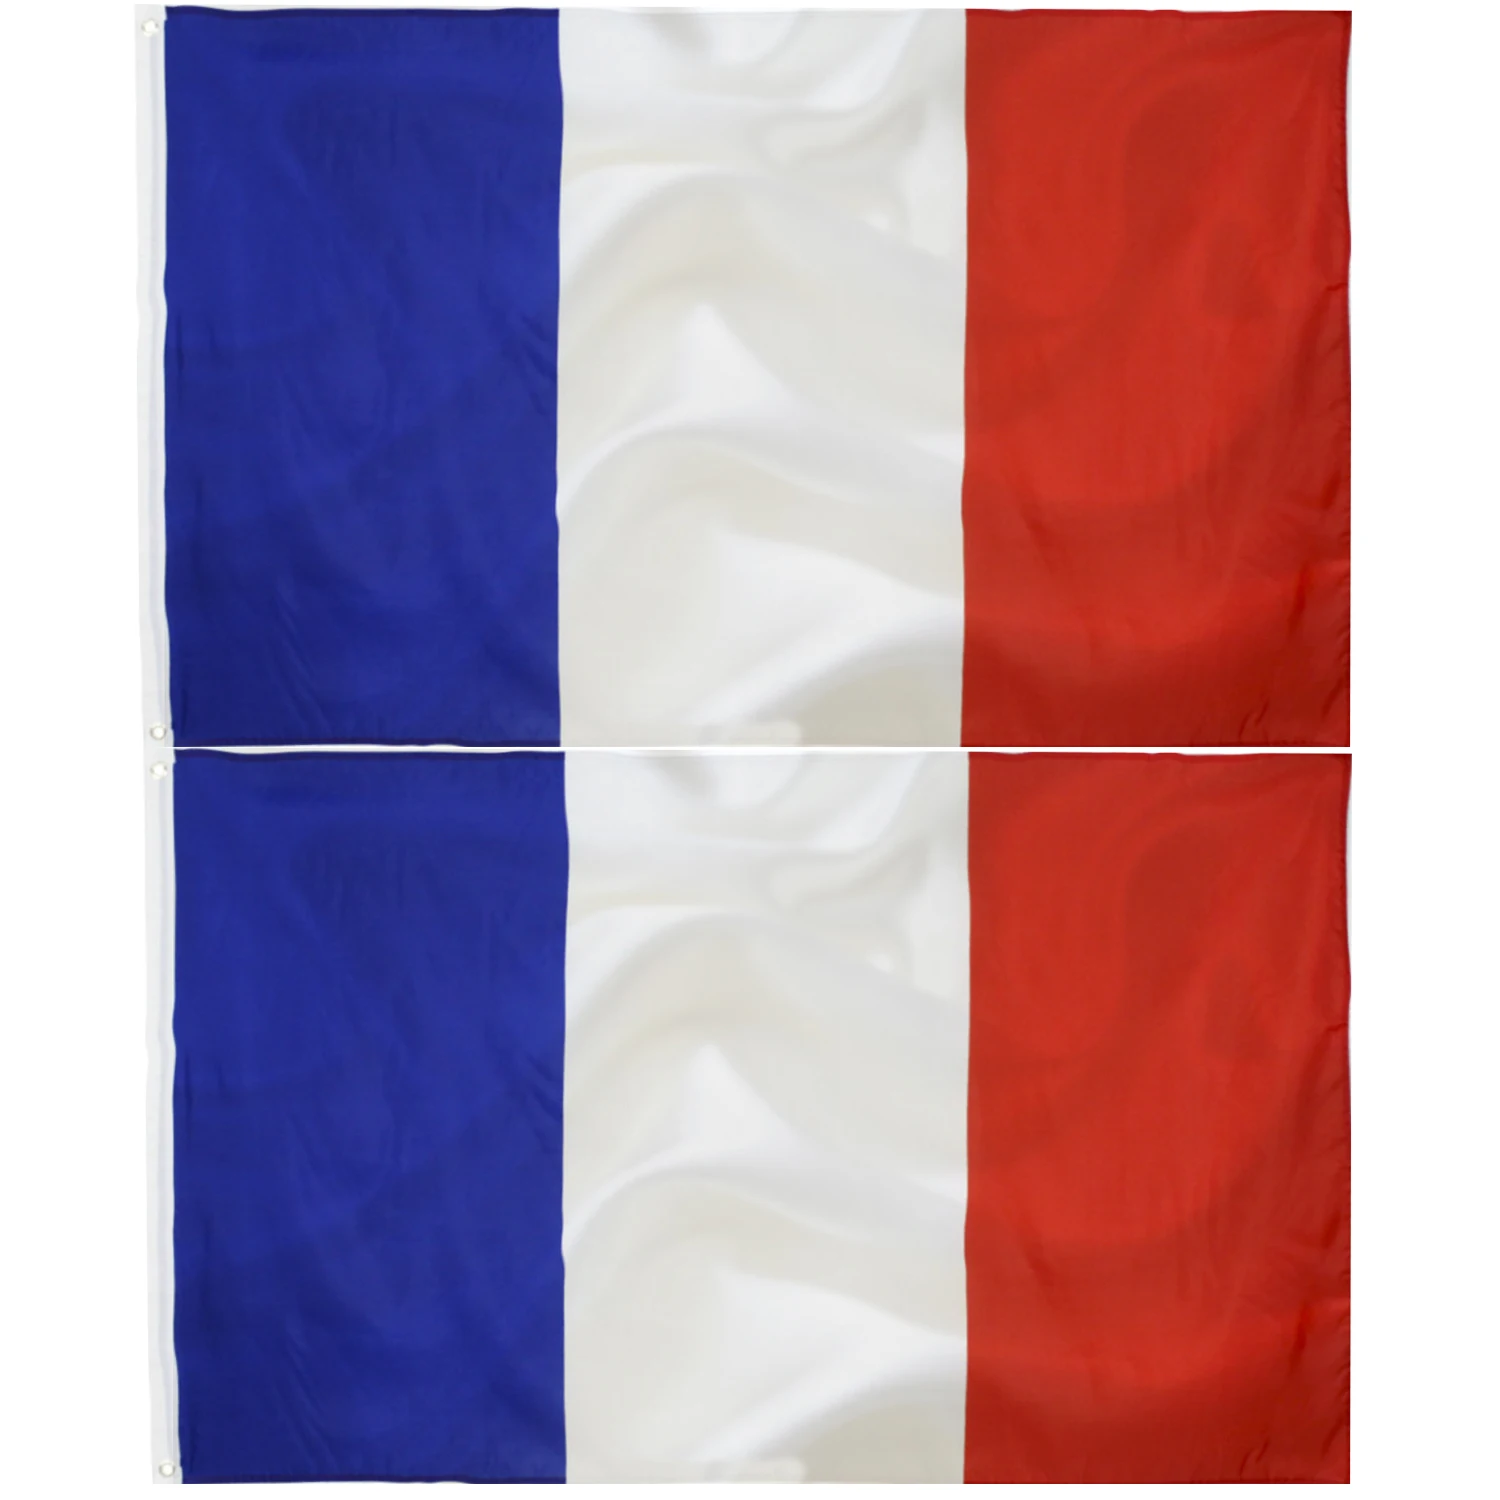 

2pcs France Flag 90x150cm French National Flags Polyester Vivid Color and Fade Proof with Brass Grommets